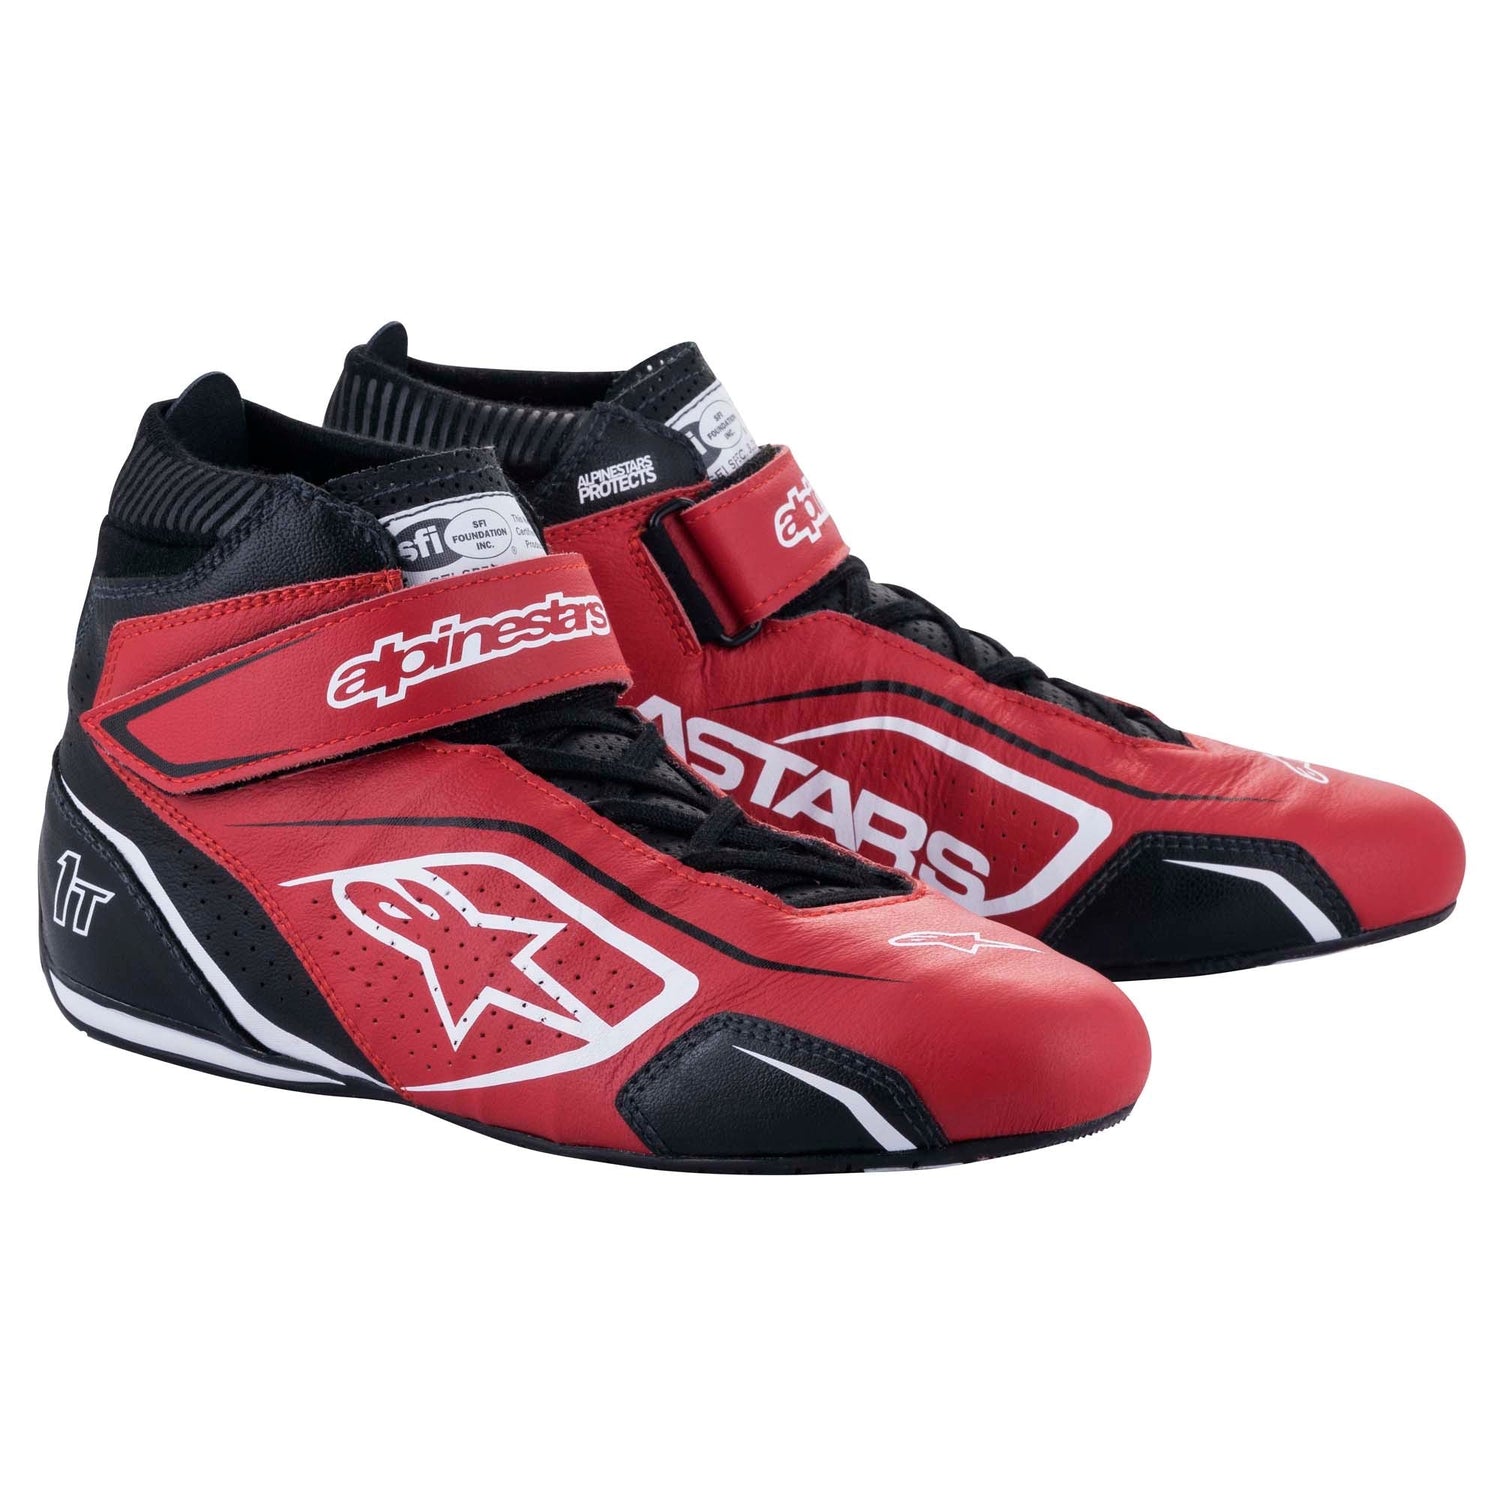 All Racing Shoes